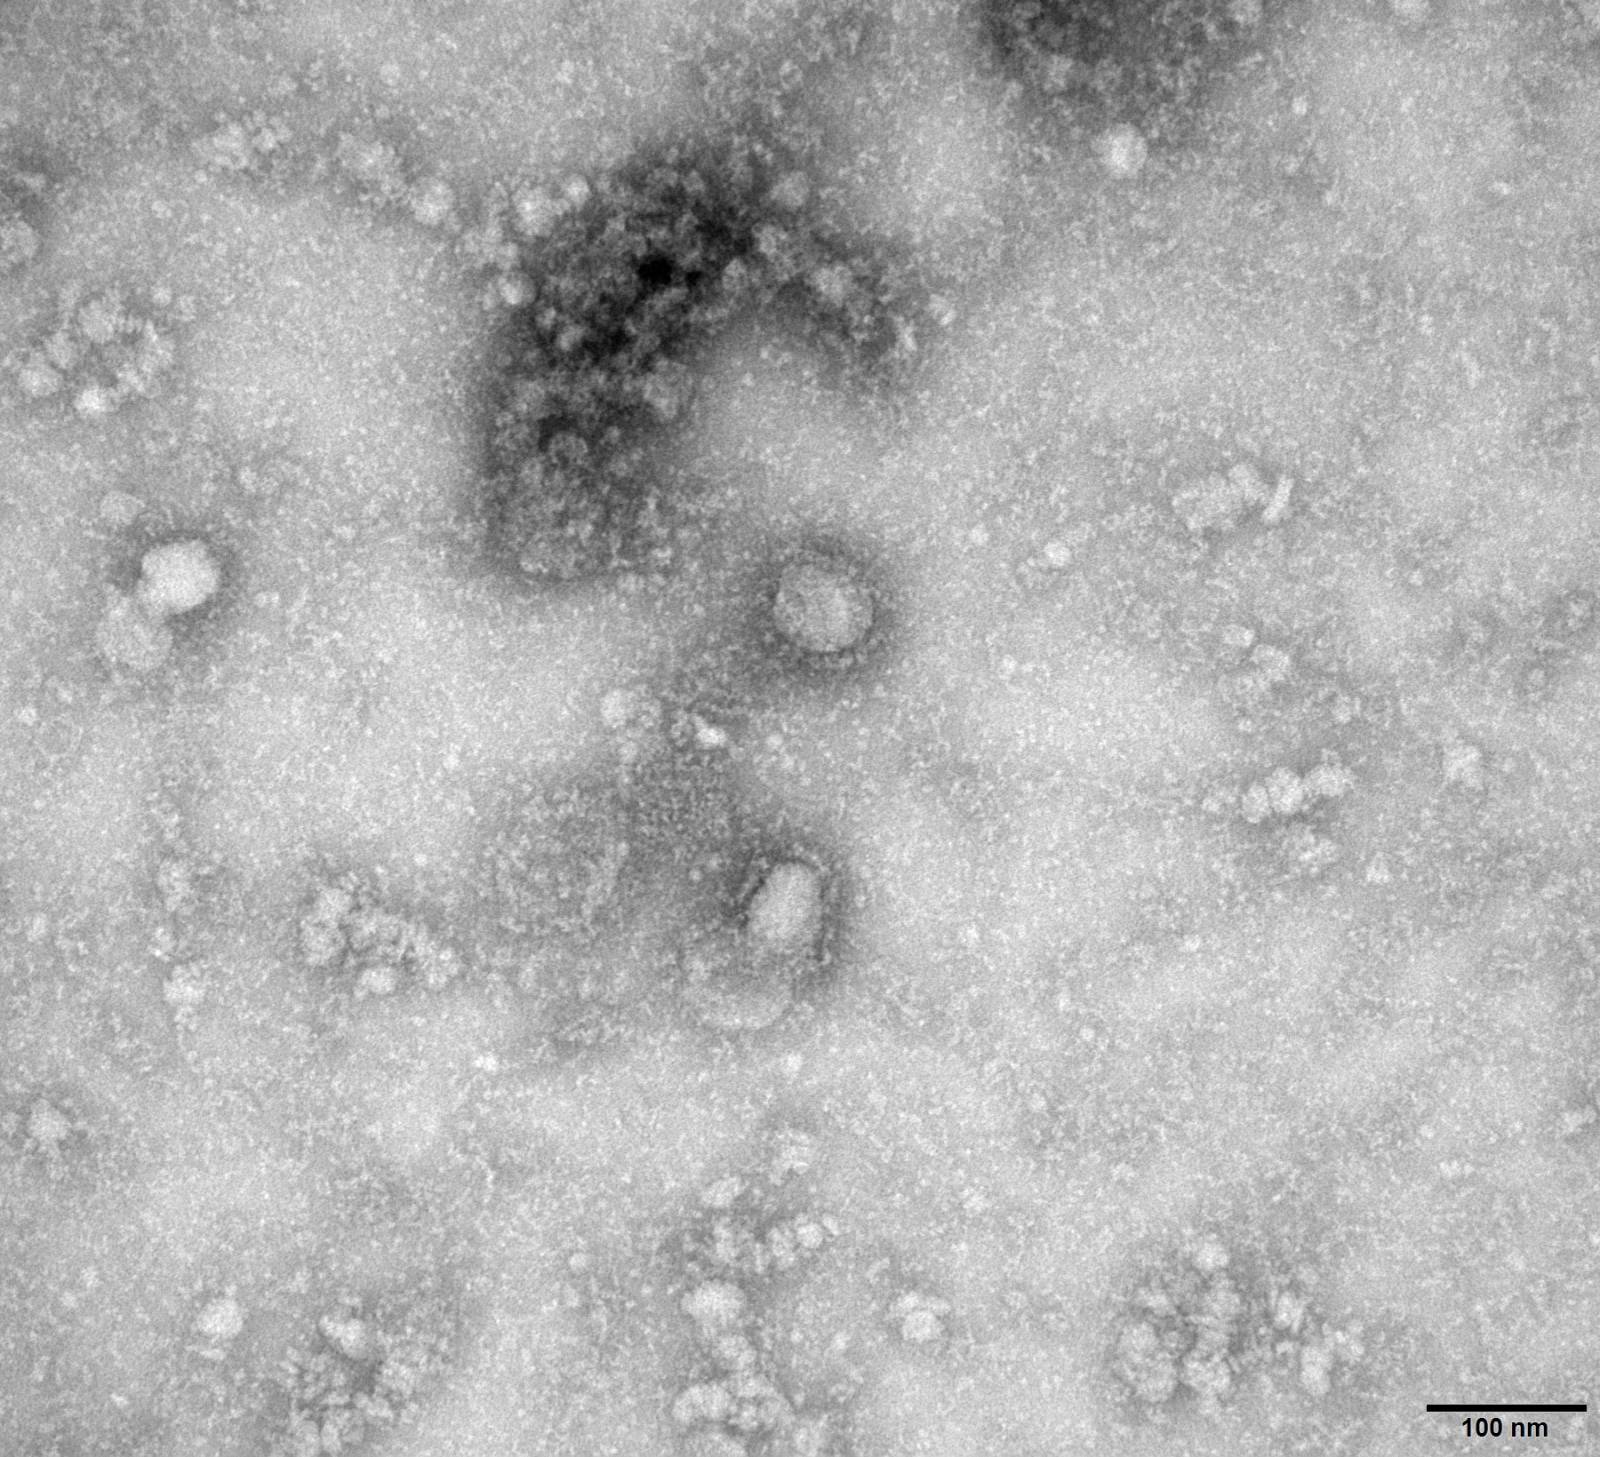 A Transmission Electron Microscopy image of the first isolated case of the coronavirus